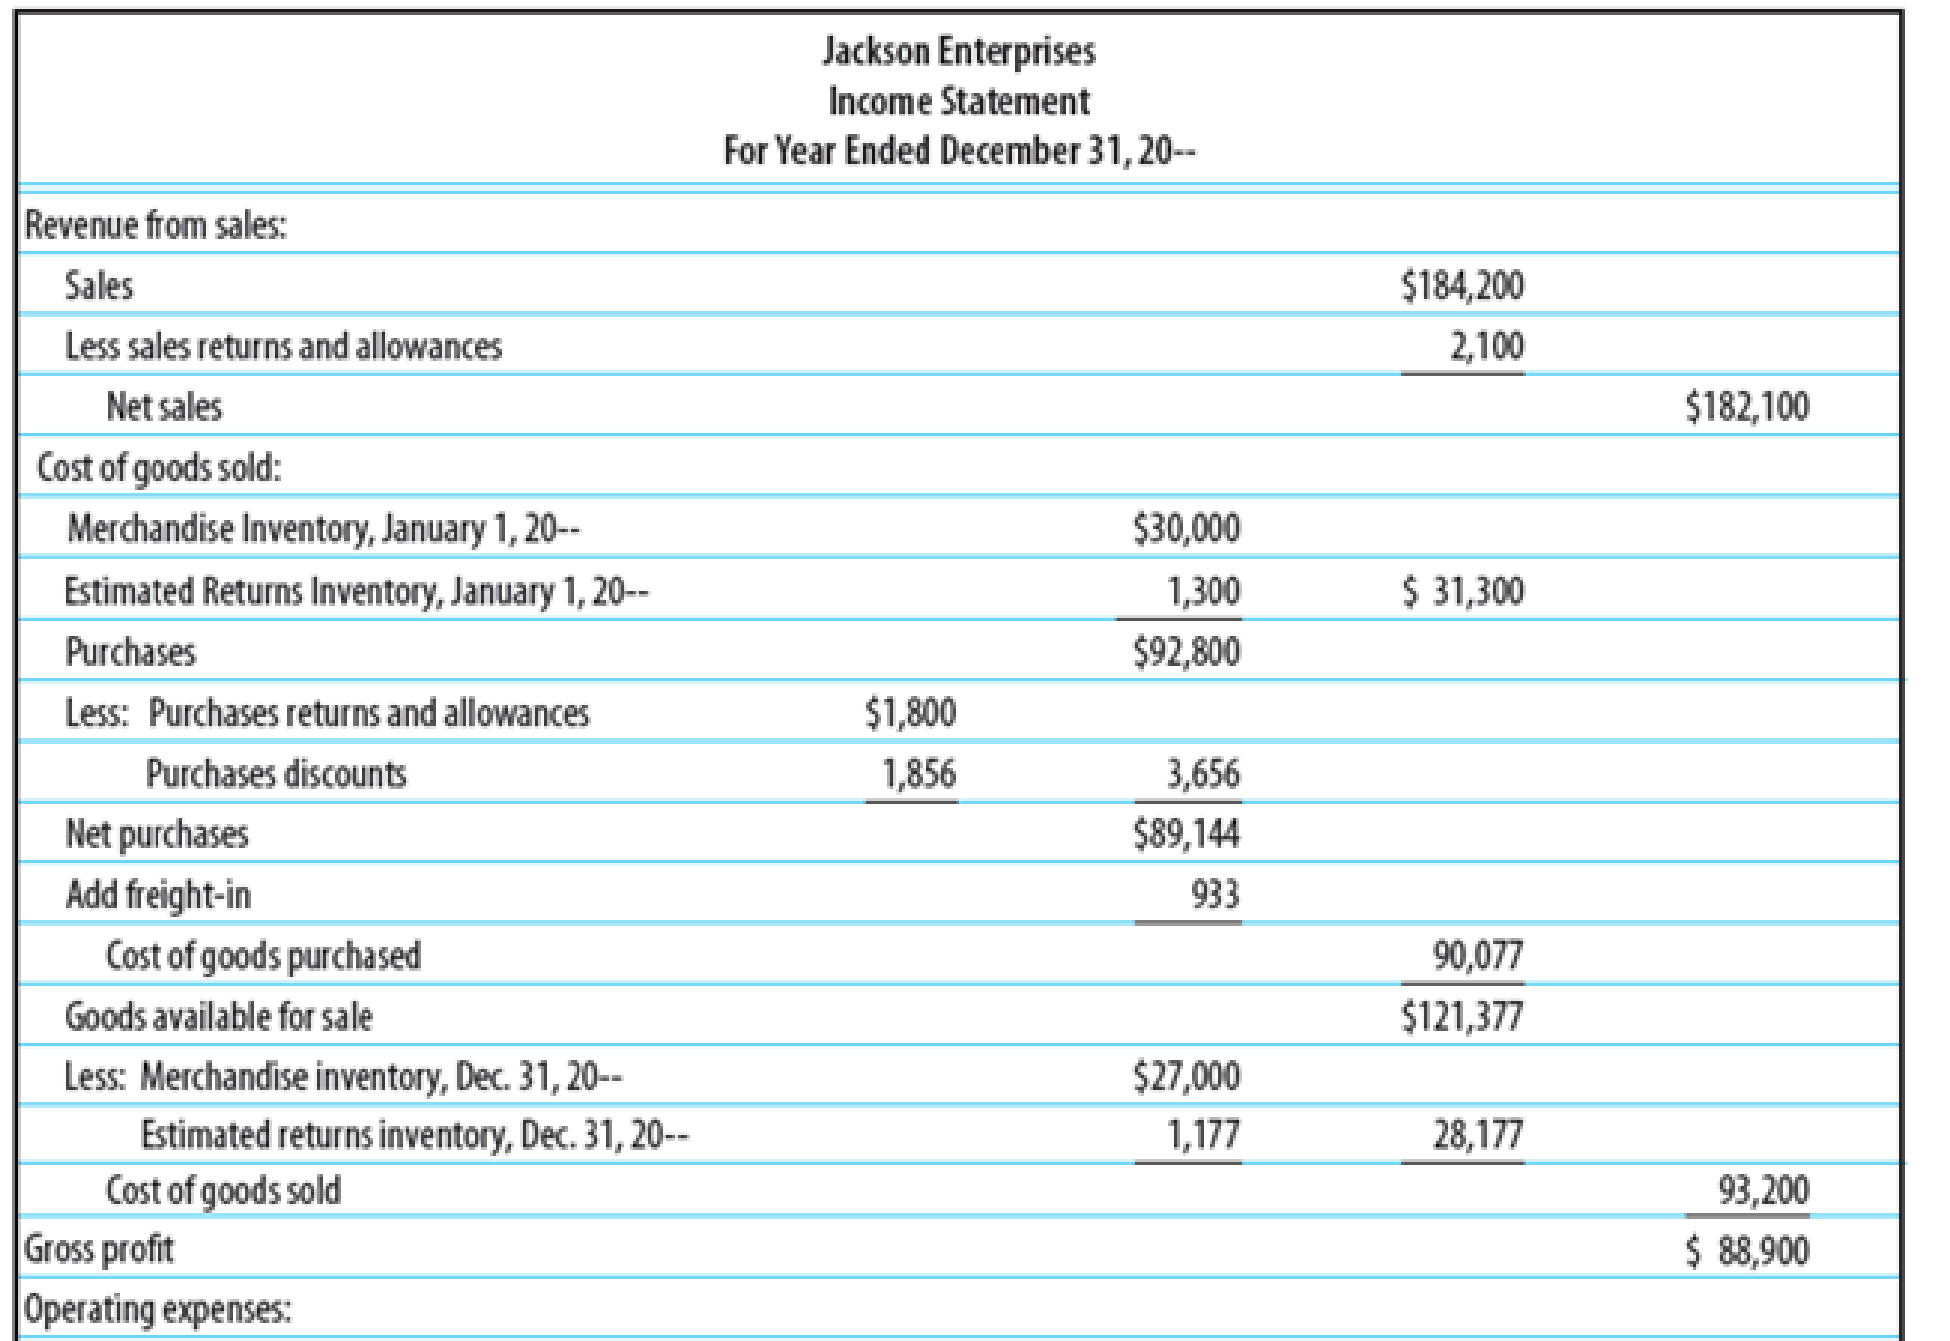 Chapter 15, Problem 4SEA, FINANCIAL RATIOS Based on the financial statements for Jackson Enterprises (income statement, , example  1